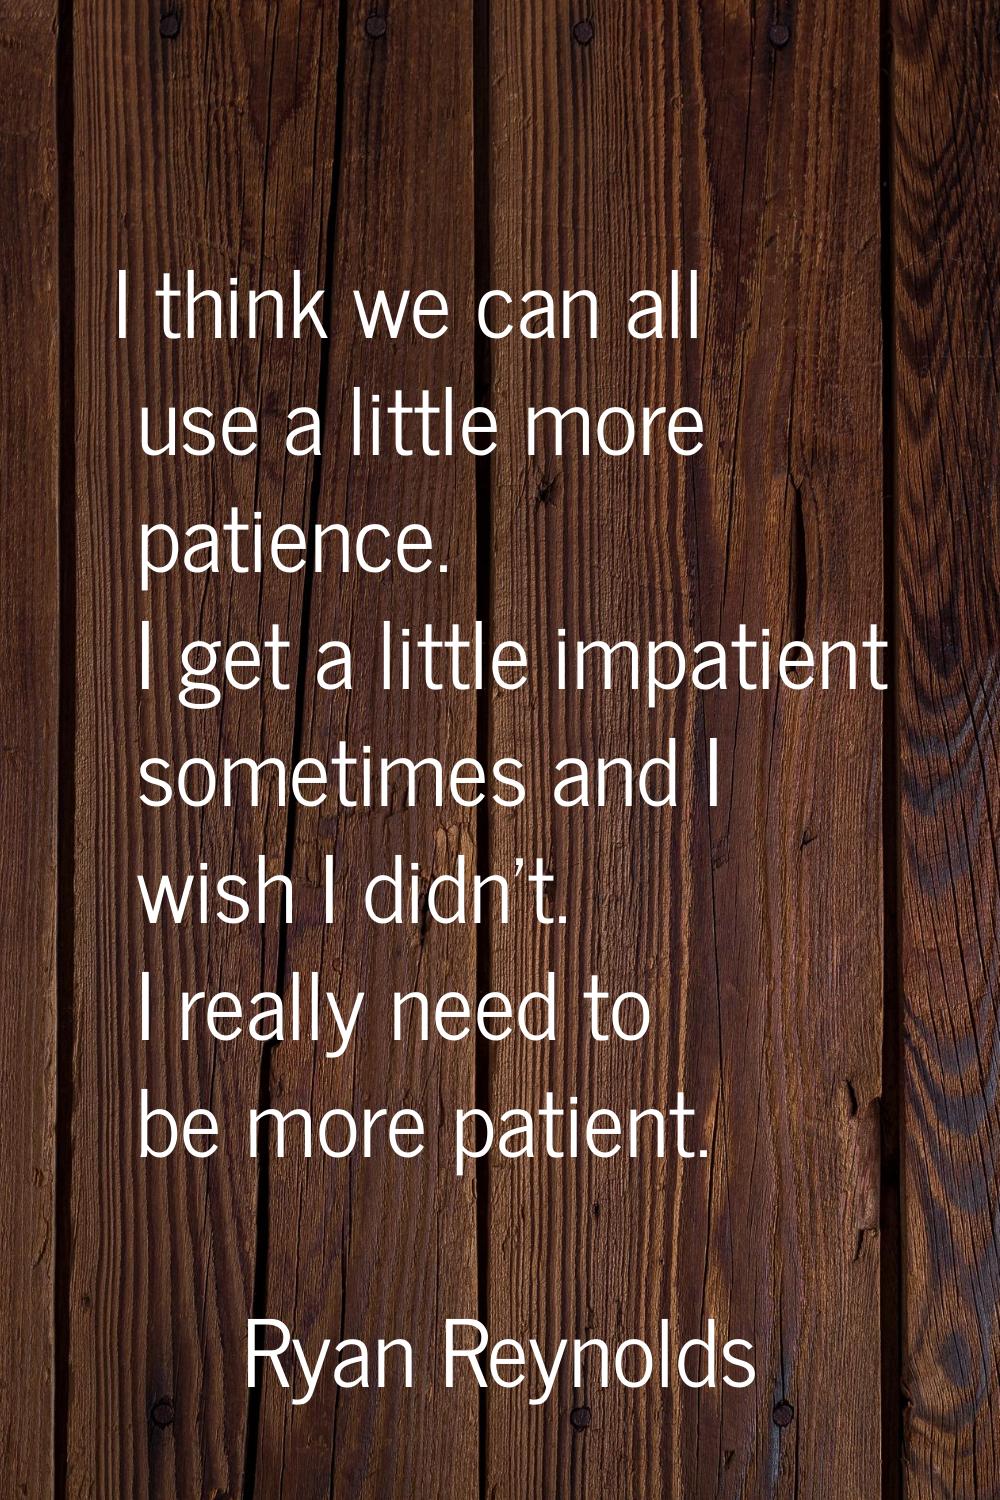 I think we can all use a little more patience. I get a little impatient sometimes and I wish I didn